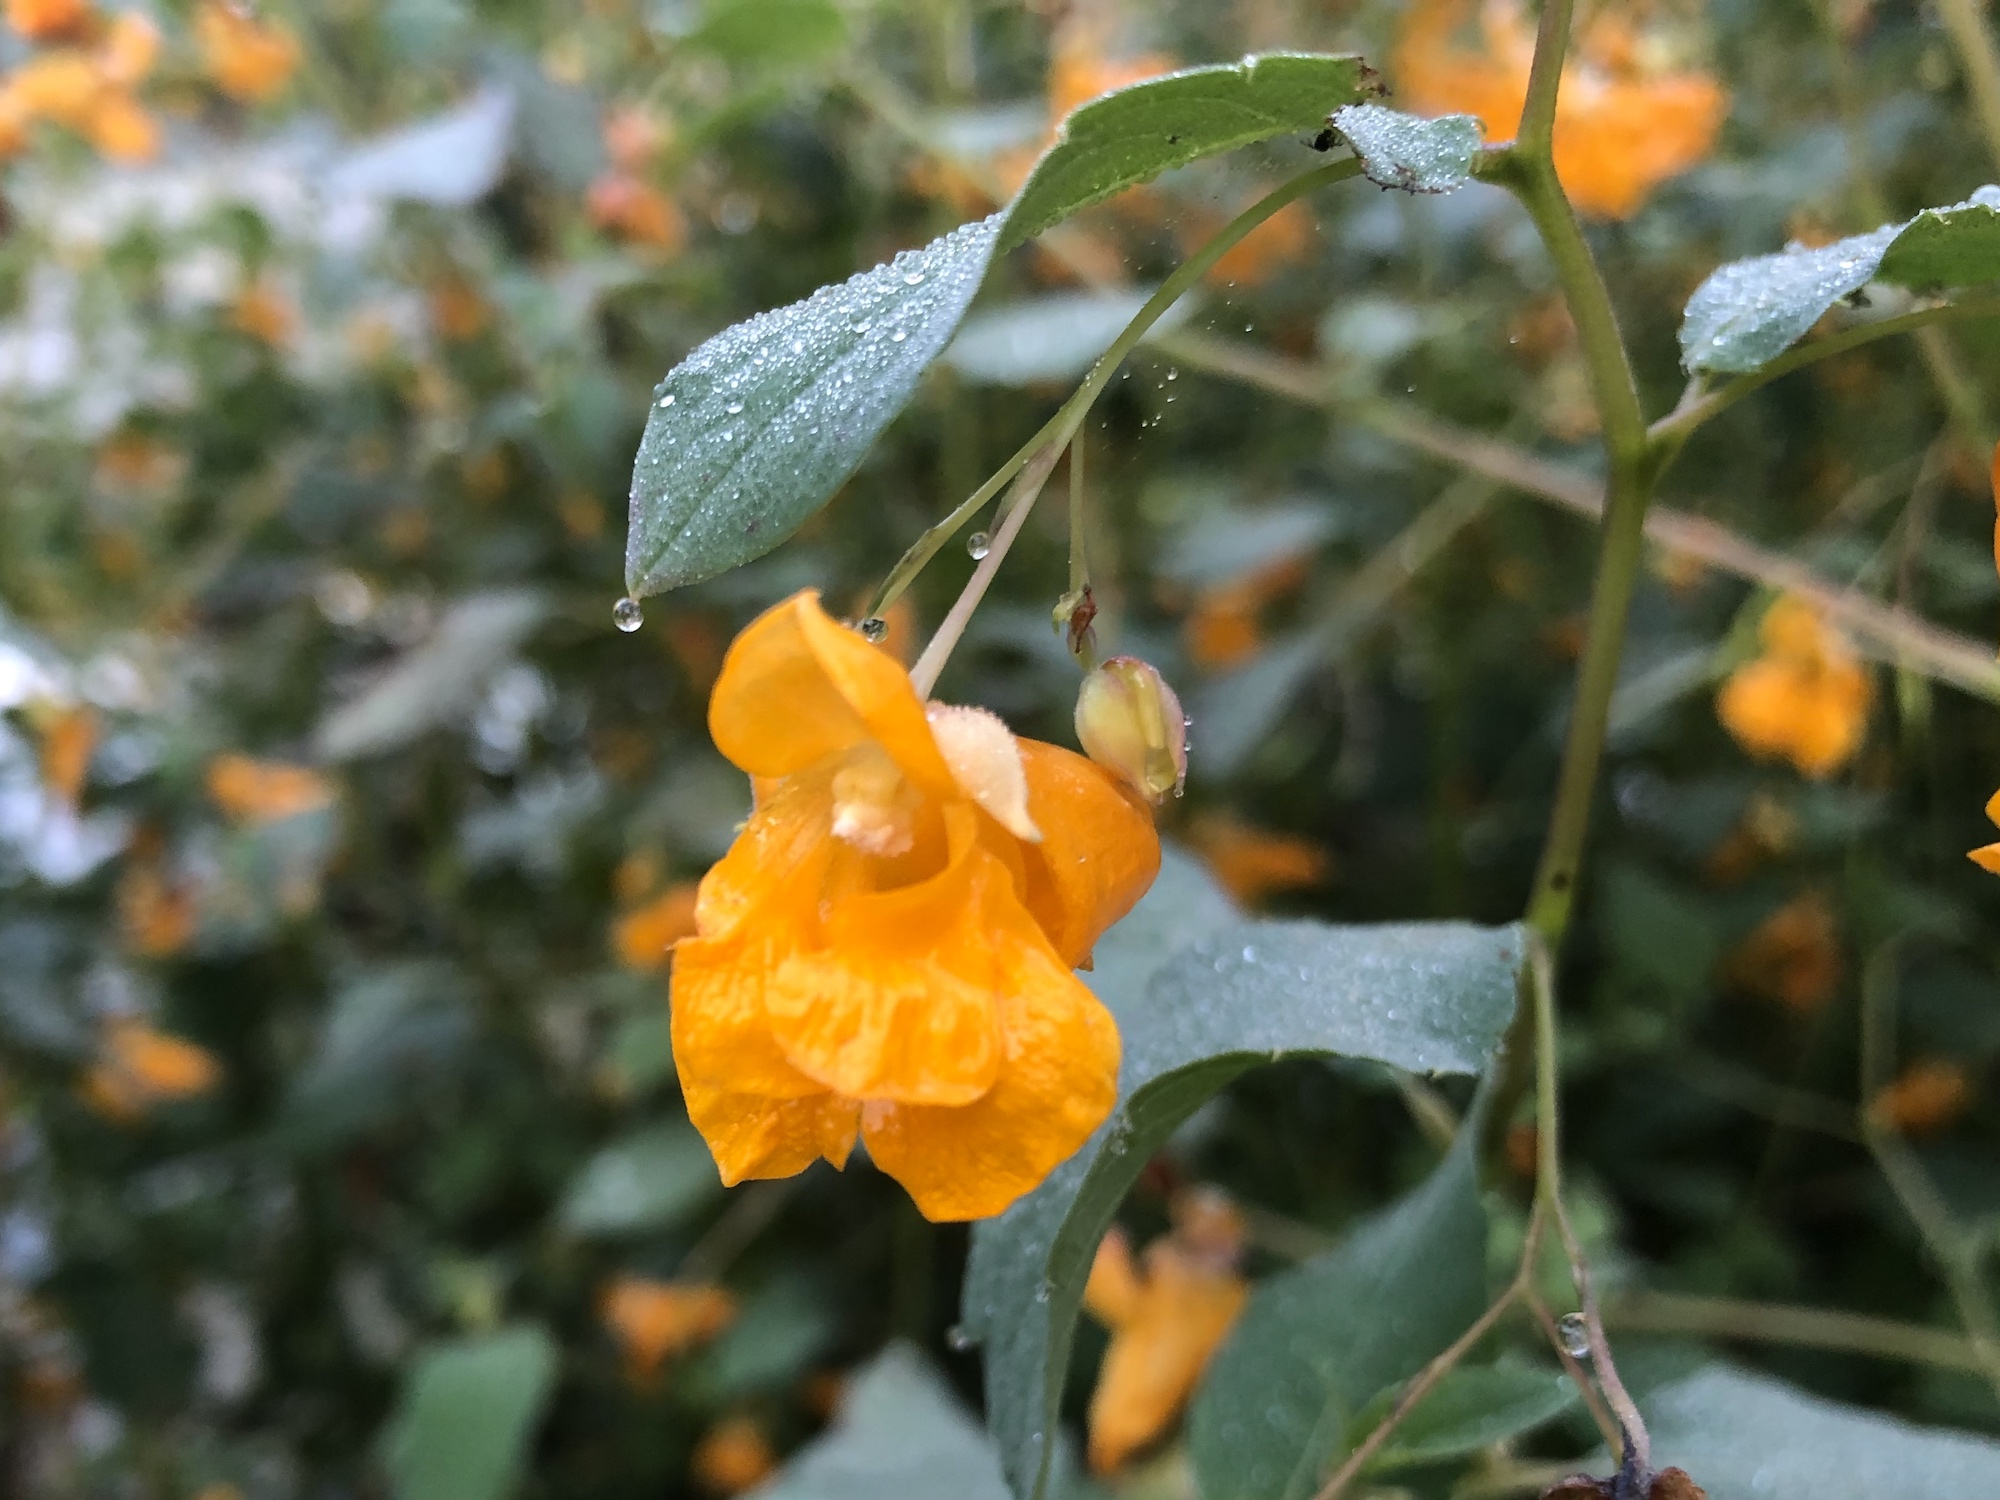 Spotted Jewelweed on shore of Duck Pond on August 23, 2019.